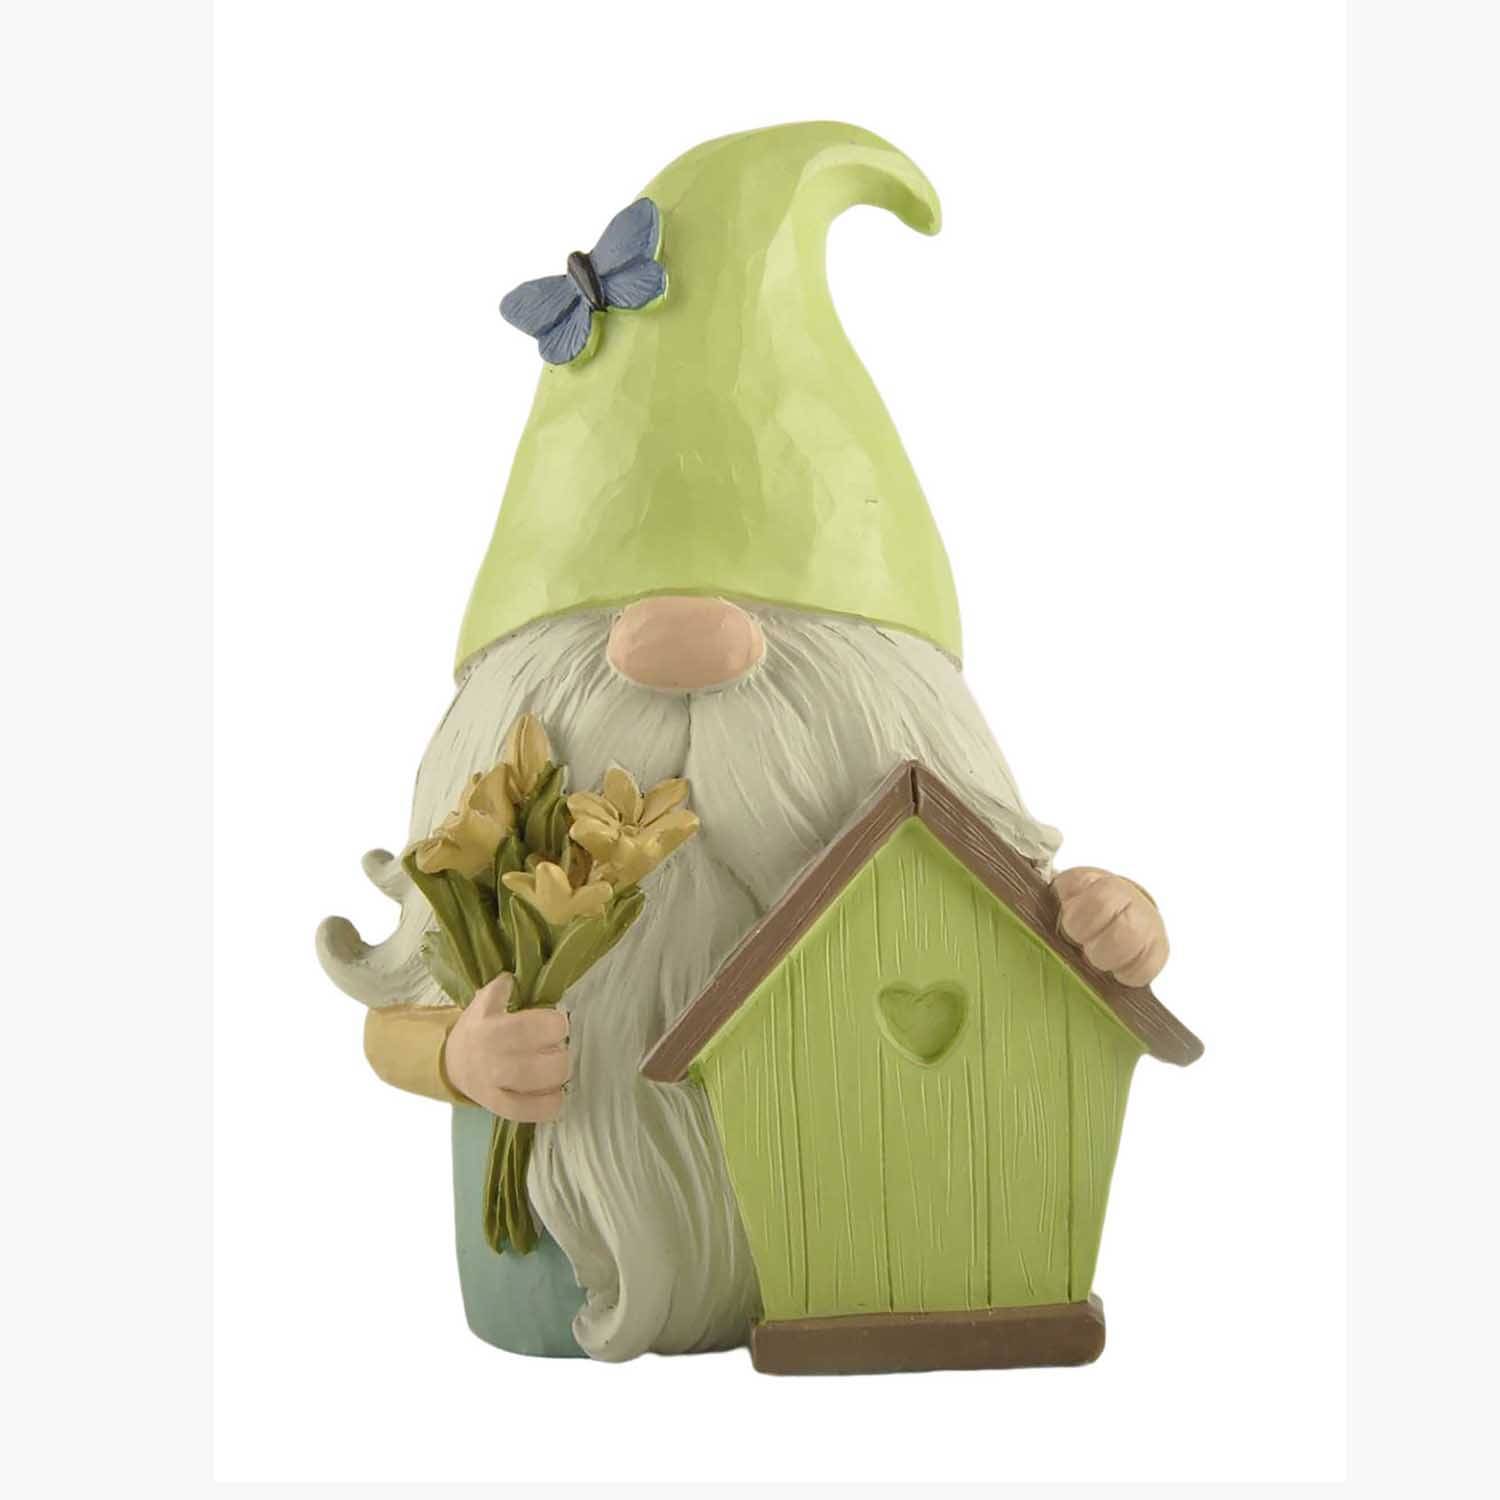 2023 Spring New Gifts Garden Gnome With Green Hat & Birdhouse Hand-painted Resin Crafts231-13679